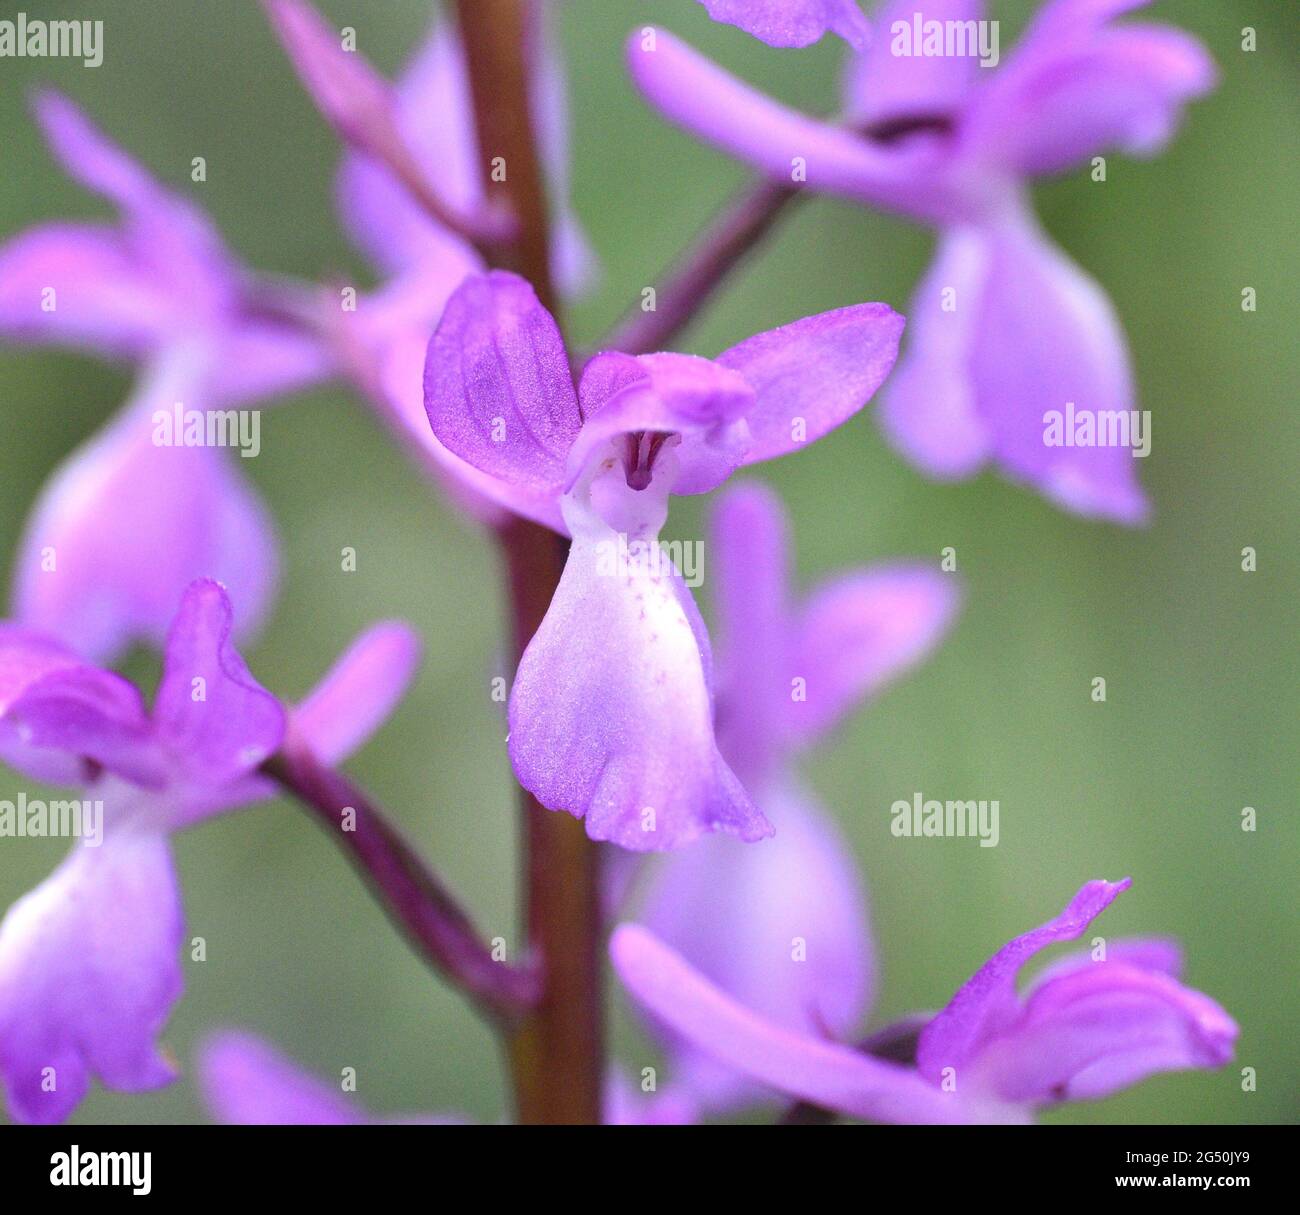 Macro frontal detail of Orchis langei flower. Pink, purple and white color, cloudy day. Stock Photo